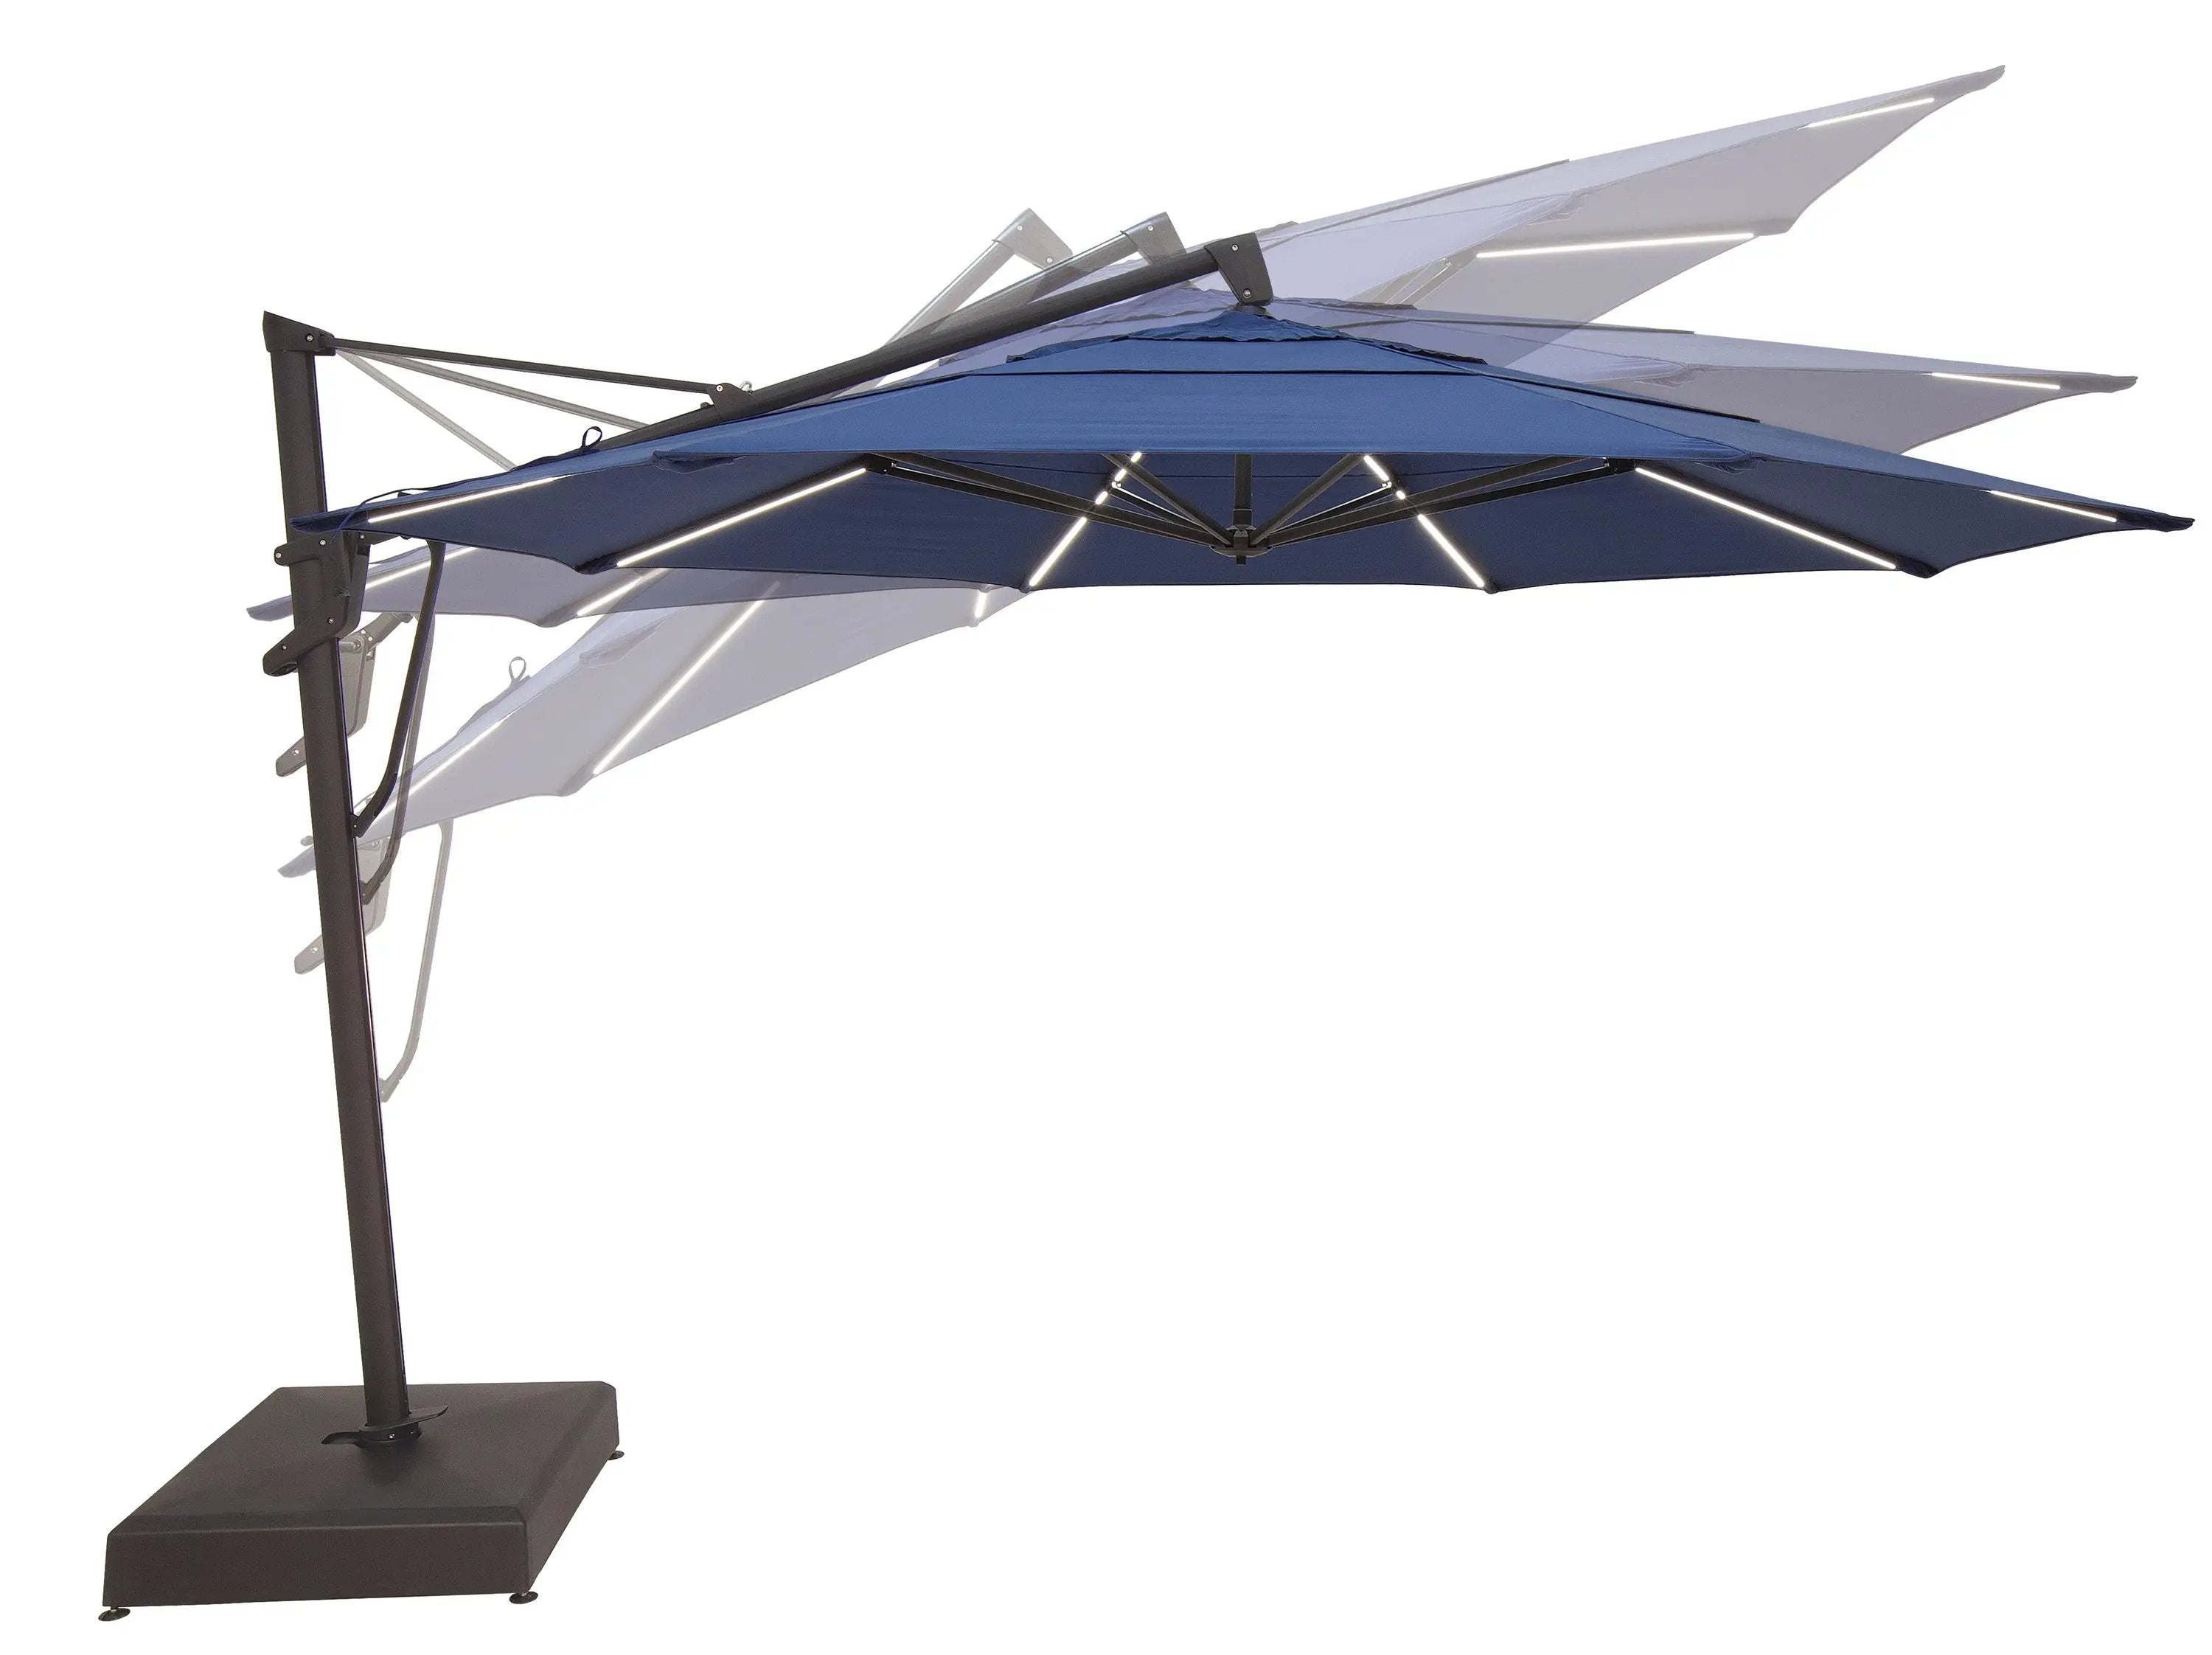  STARLUX, AKZP13 Cantilever Canopy